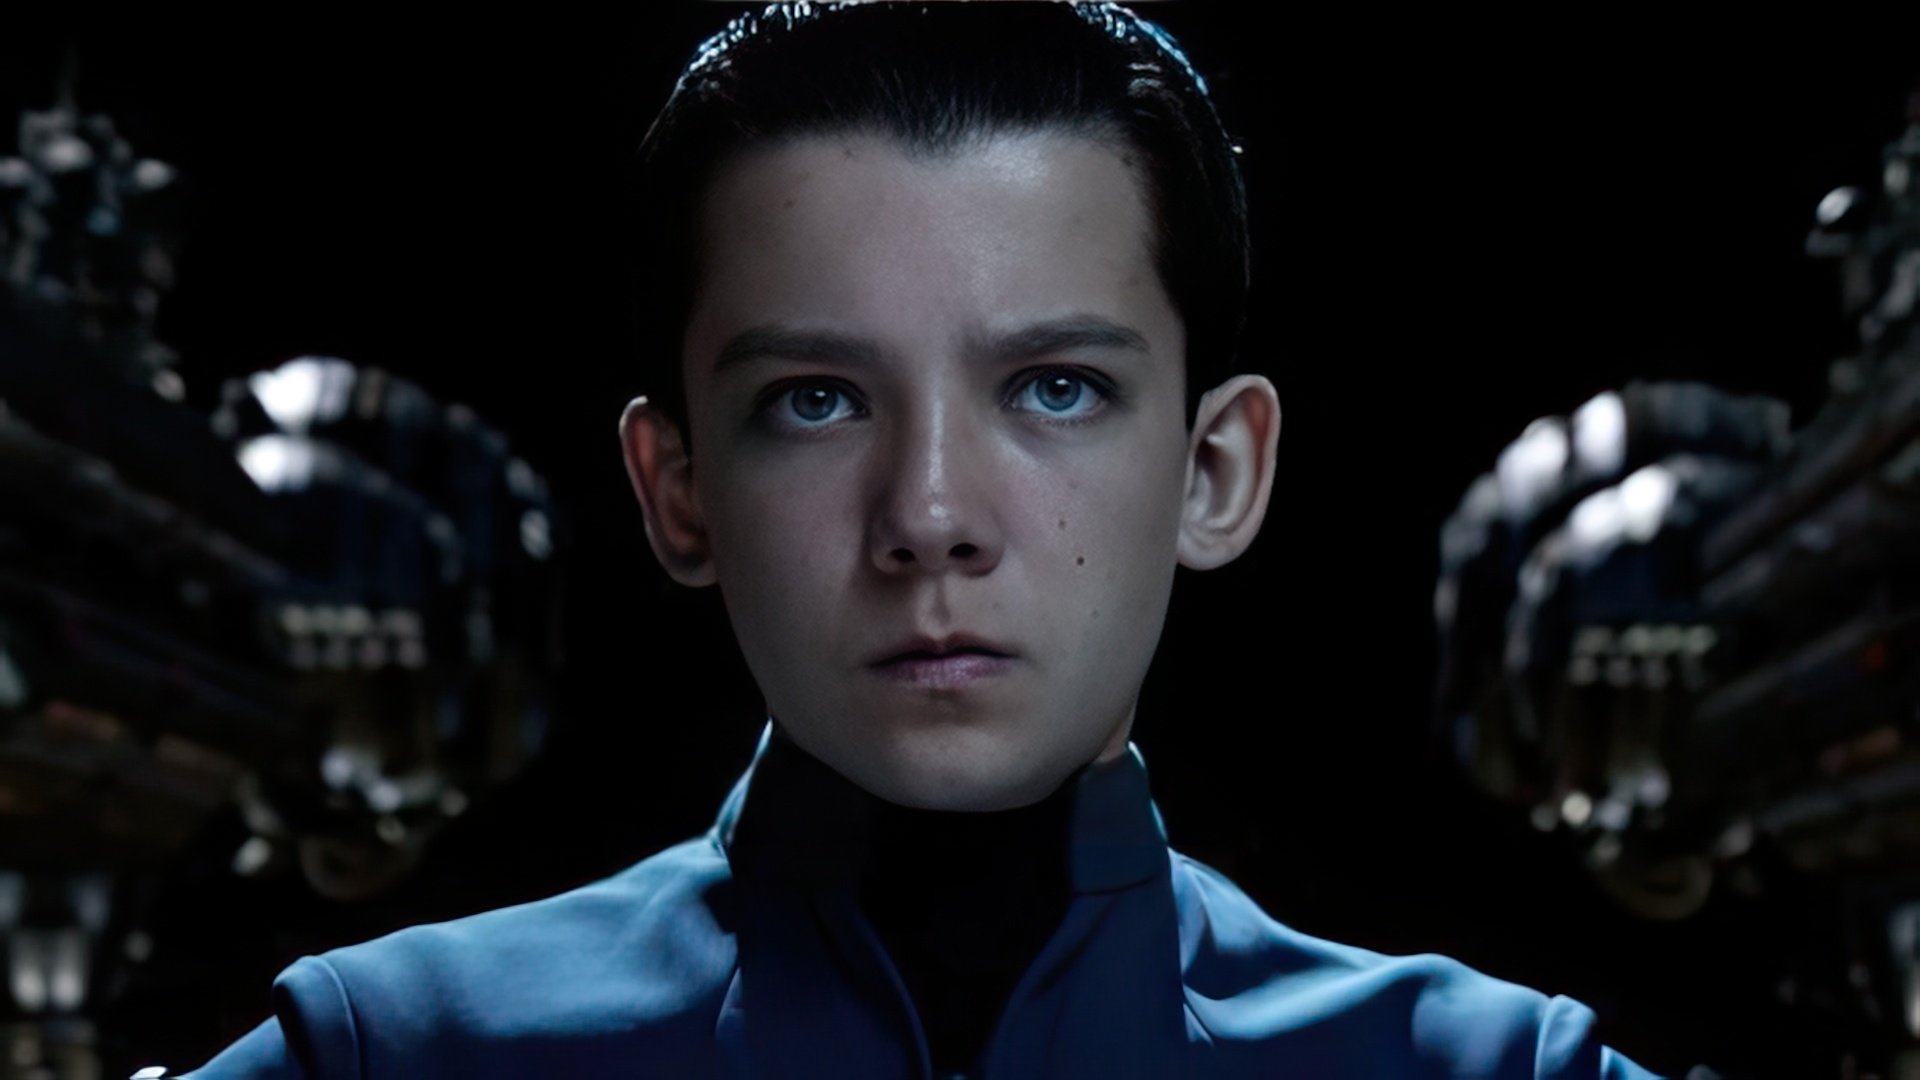 In “Ender’s Game,” Asa Butterfield portrayed a strategic military leader